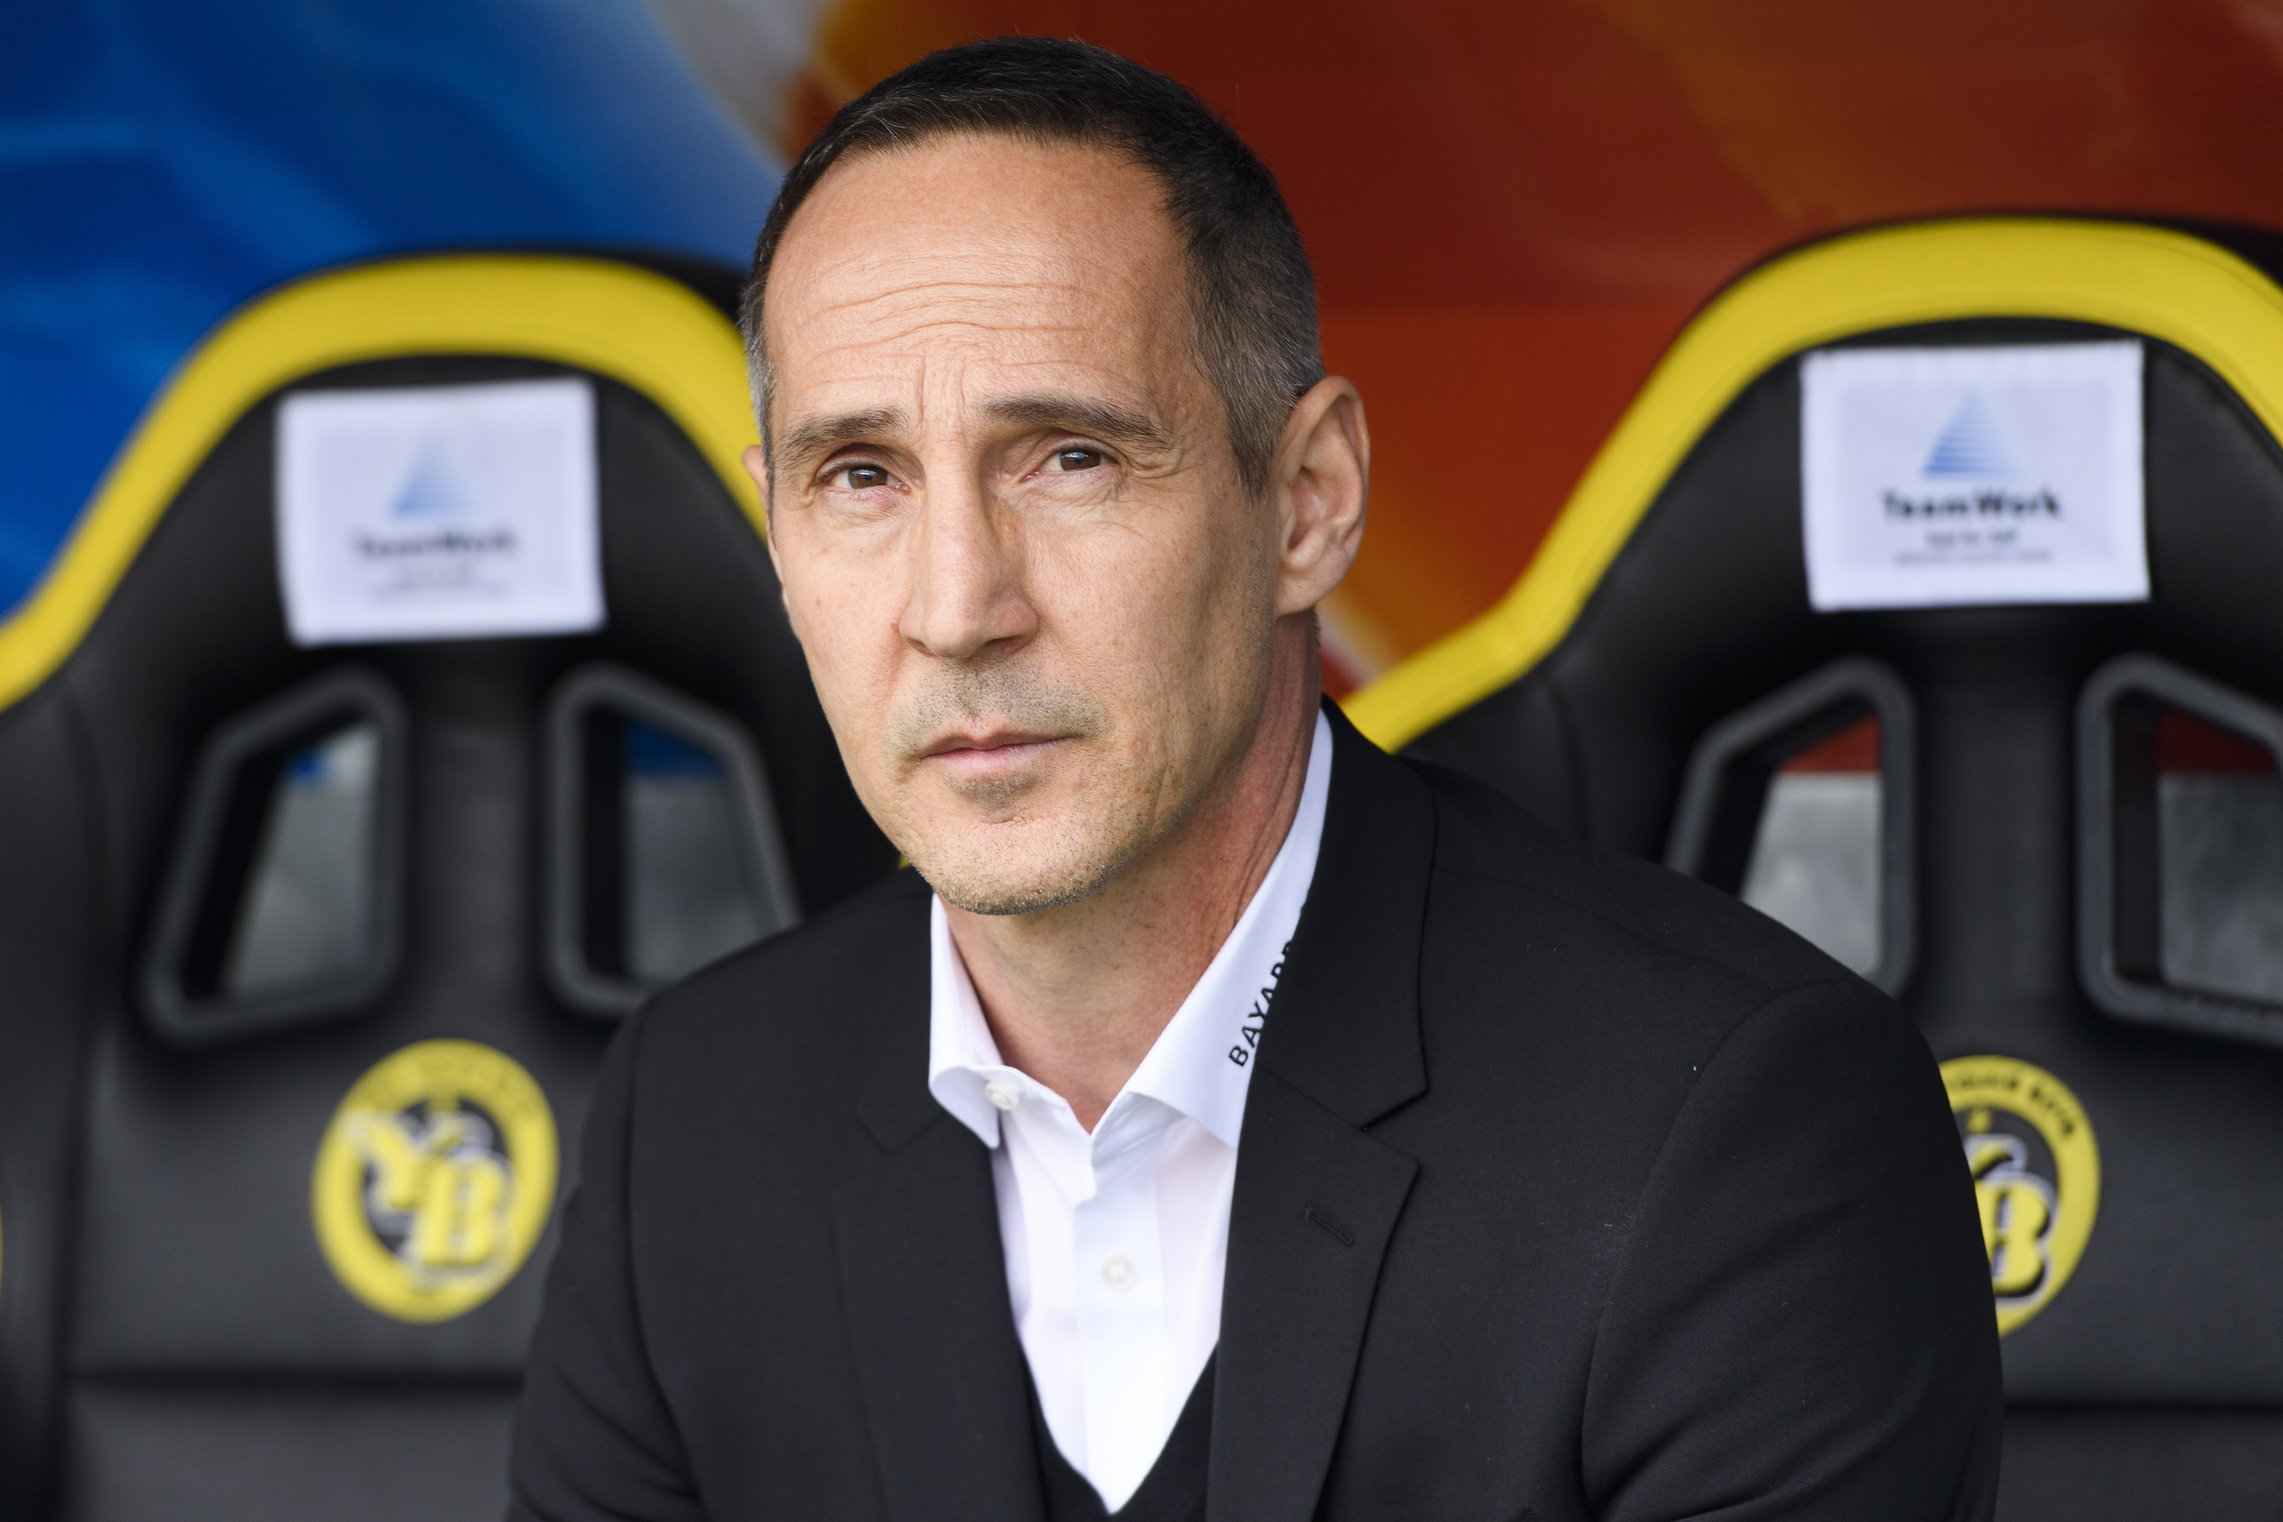 epa06741701 (FILE) Bern's headcoach Adi Huetter during the Super League match between BSC Young Boys Bern and FC Basel at the Stade de Suisse in Bern, Switzerland, 02 April 2018 (reissued 16 May 2019). Media reports state that Adi Huetter becomes the new head coach of German Bundesliga side Eintracht Frankfurt.  EPA/ANTHONY ANEX *** Local Caption *** 54236936